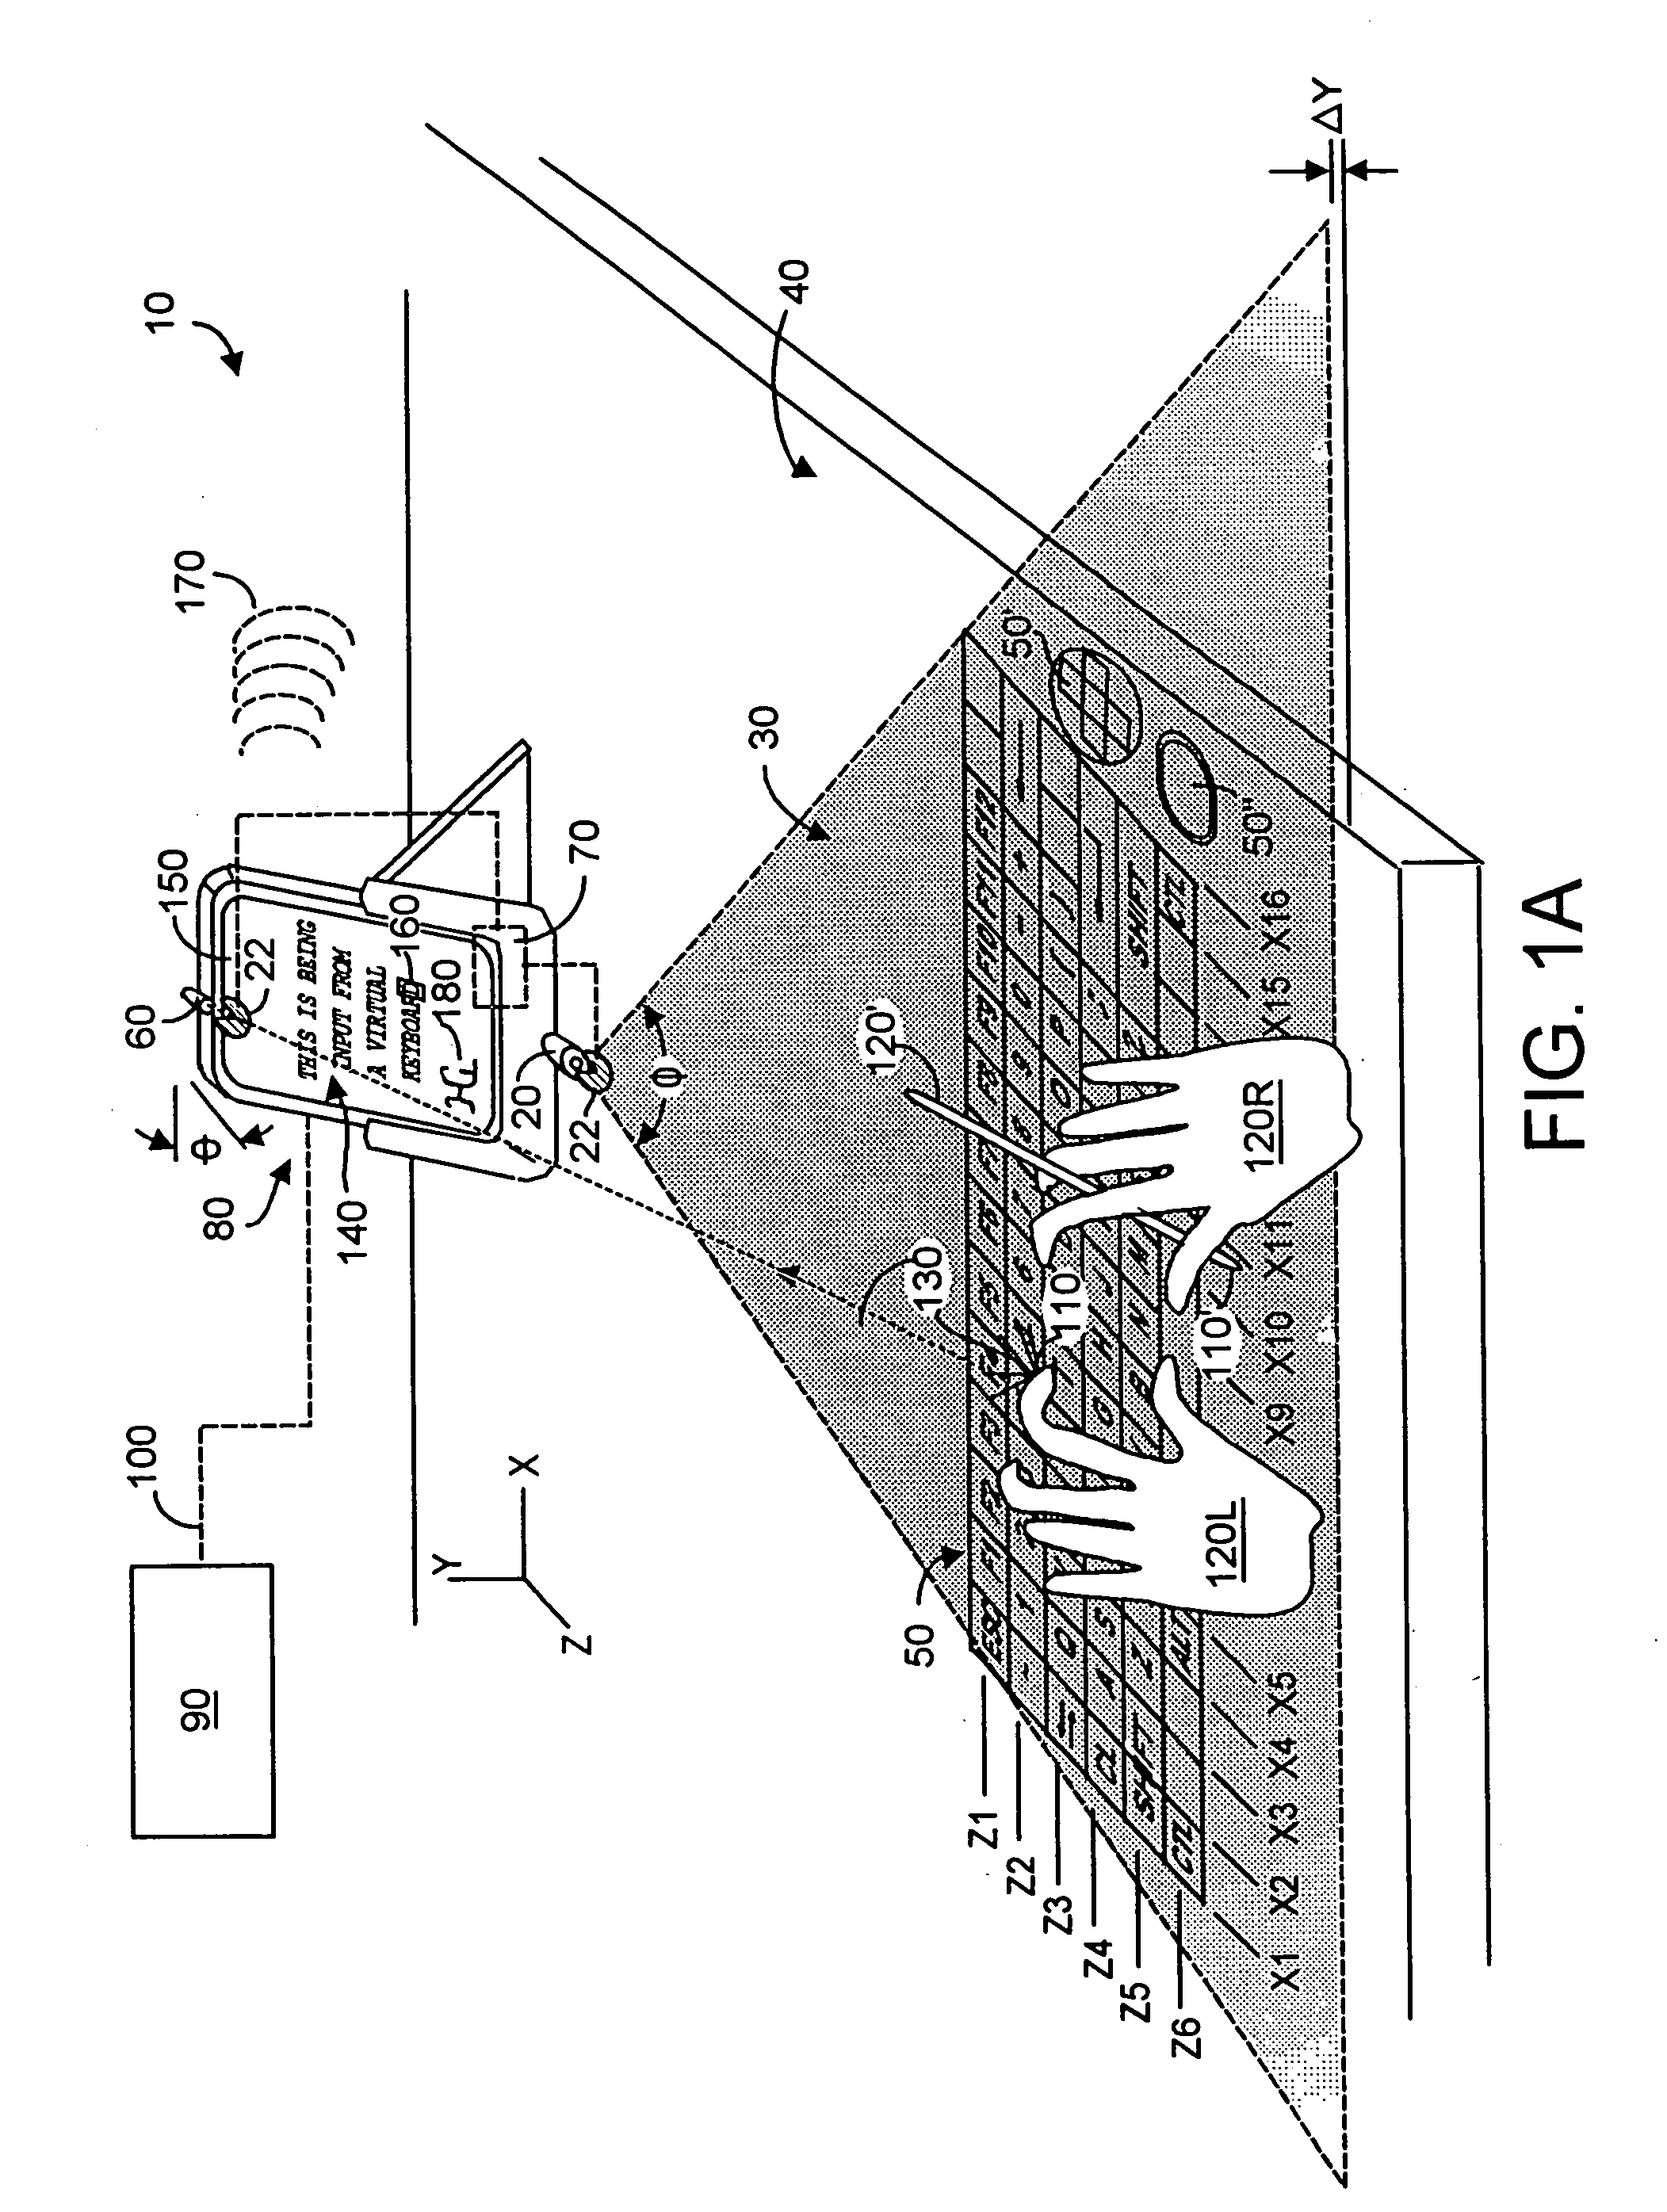 Quasi-three-dimensional method and apparatus to detect and localize interaction of user-object and virtual transfer device